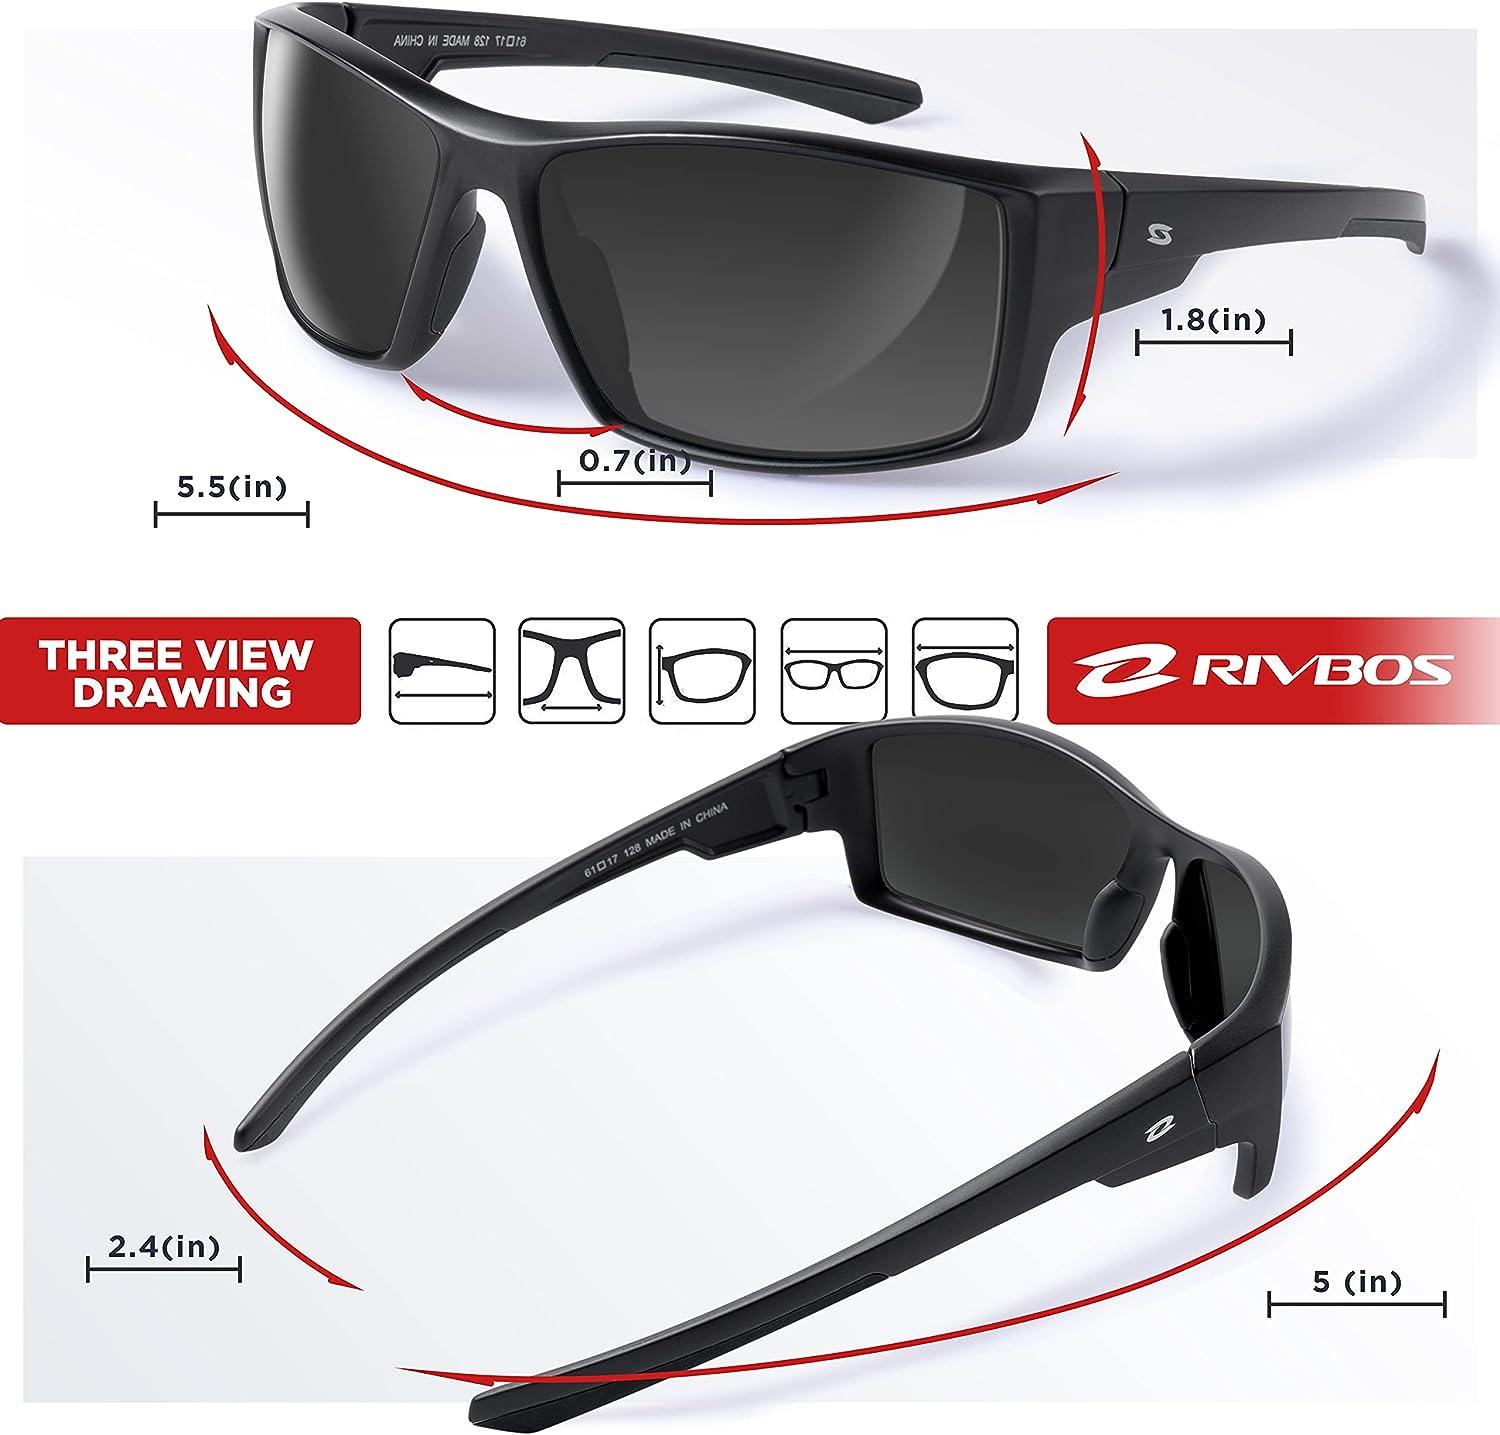 RIVBOS Polarized Sports Sunglasses Driving shades For Men TR90 Unbreakable  Frame RBS861 Rbs861- Full Black Large